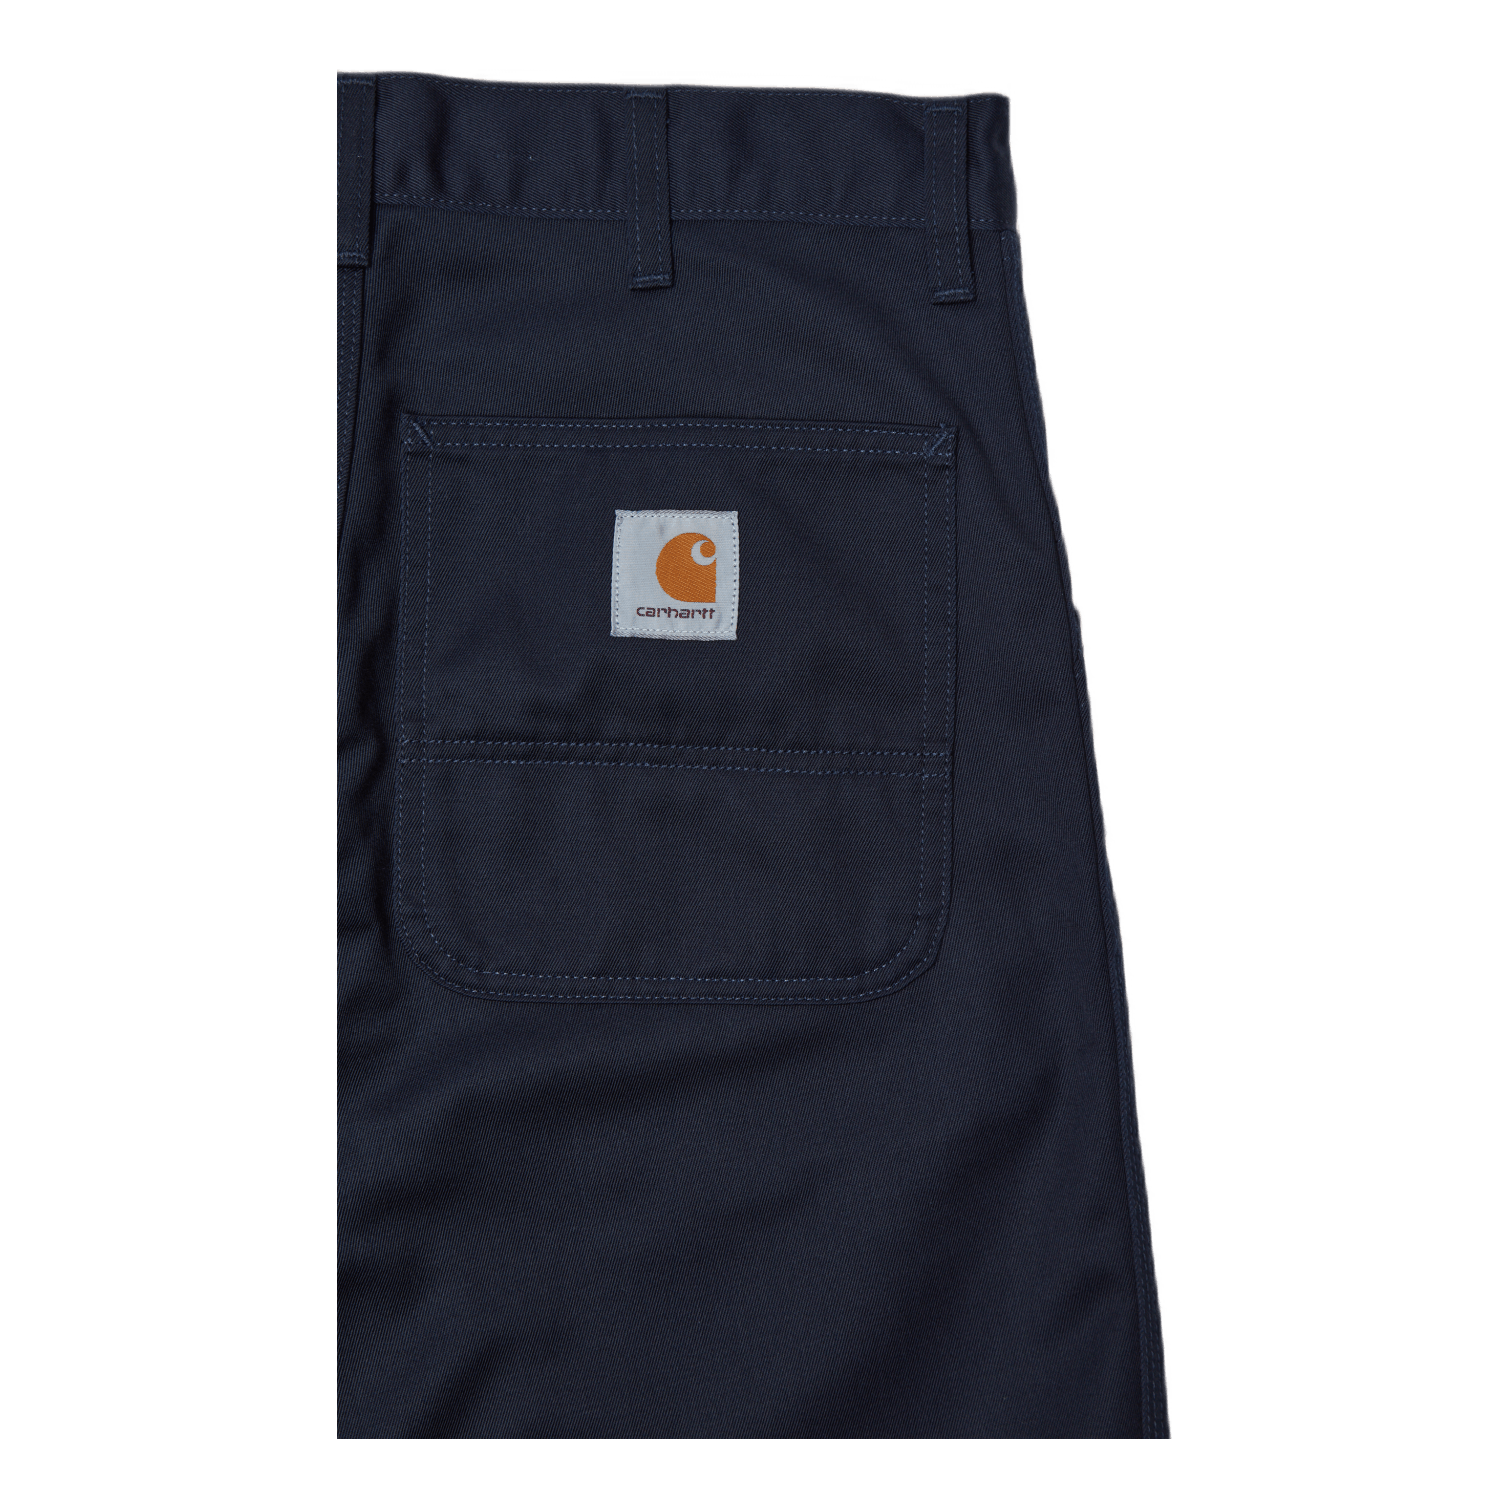 Simple Pant Polyester/cotton D Dark Navy